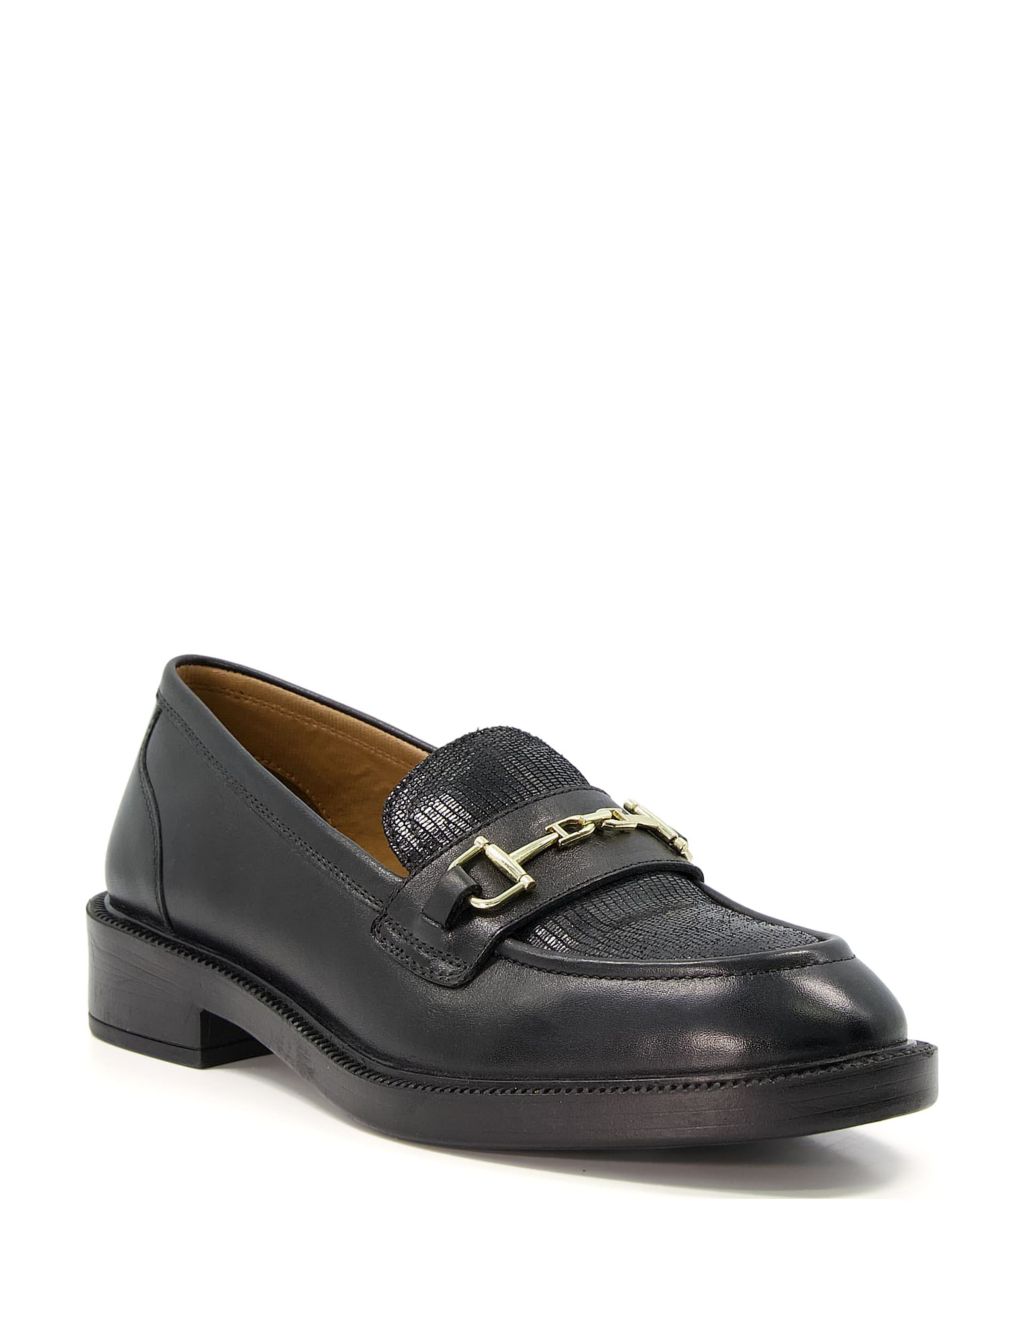 Leather Bar Trim Flat Loafers image 2